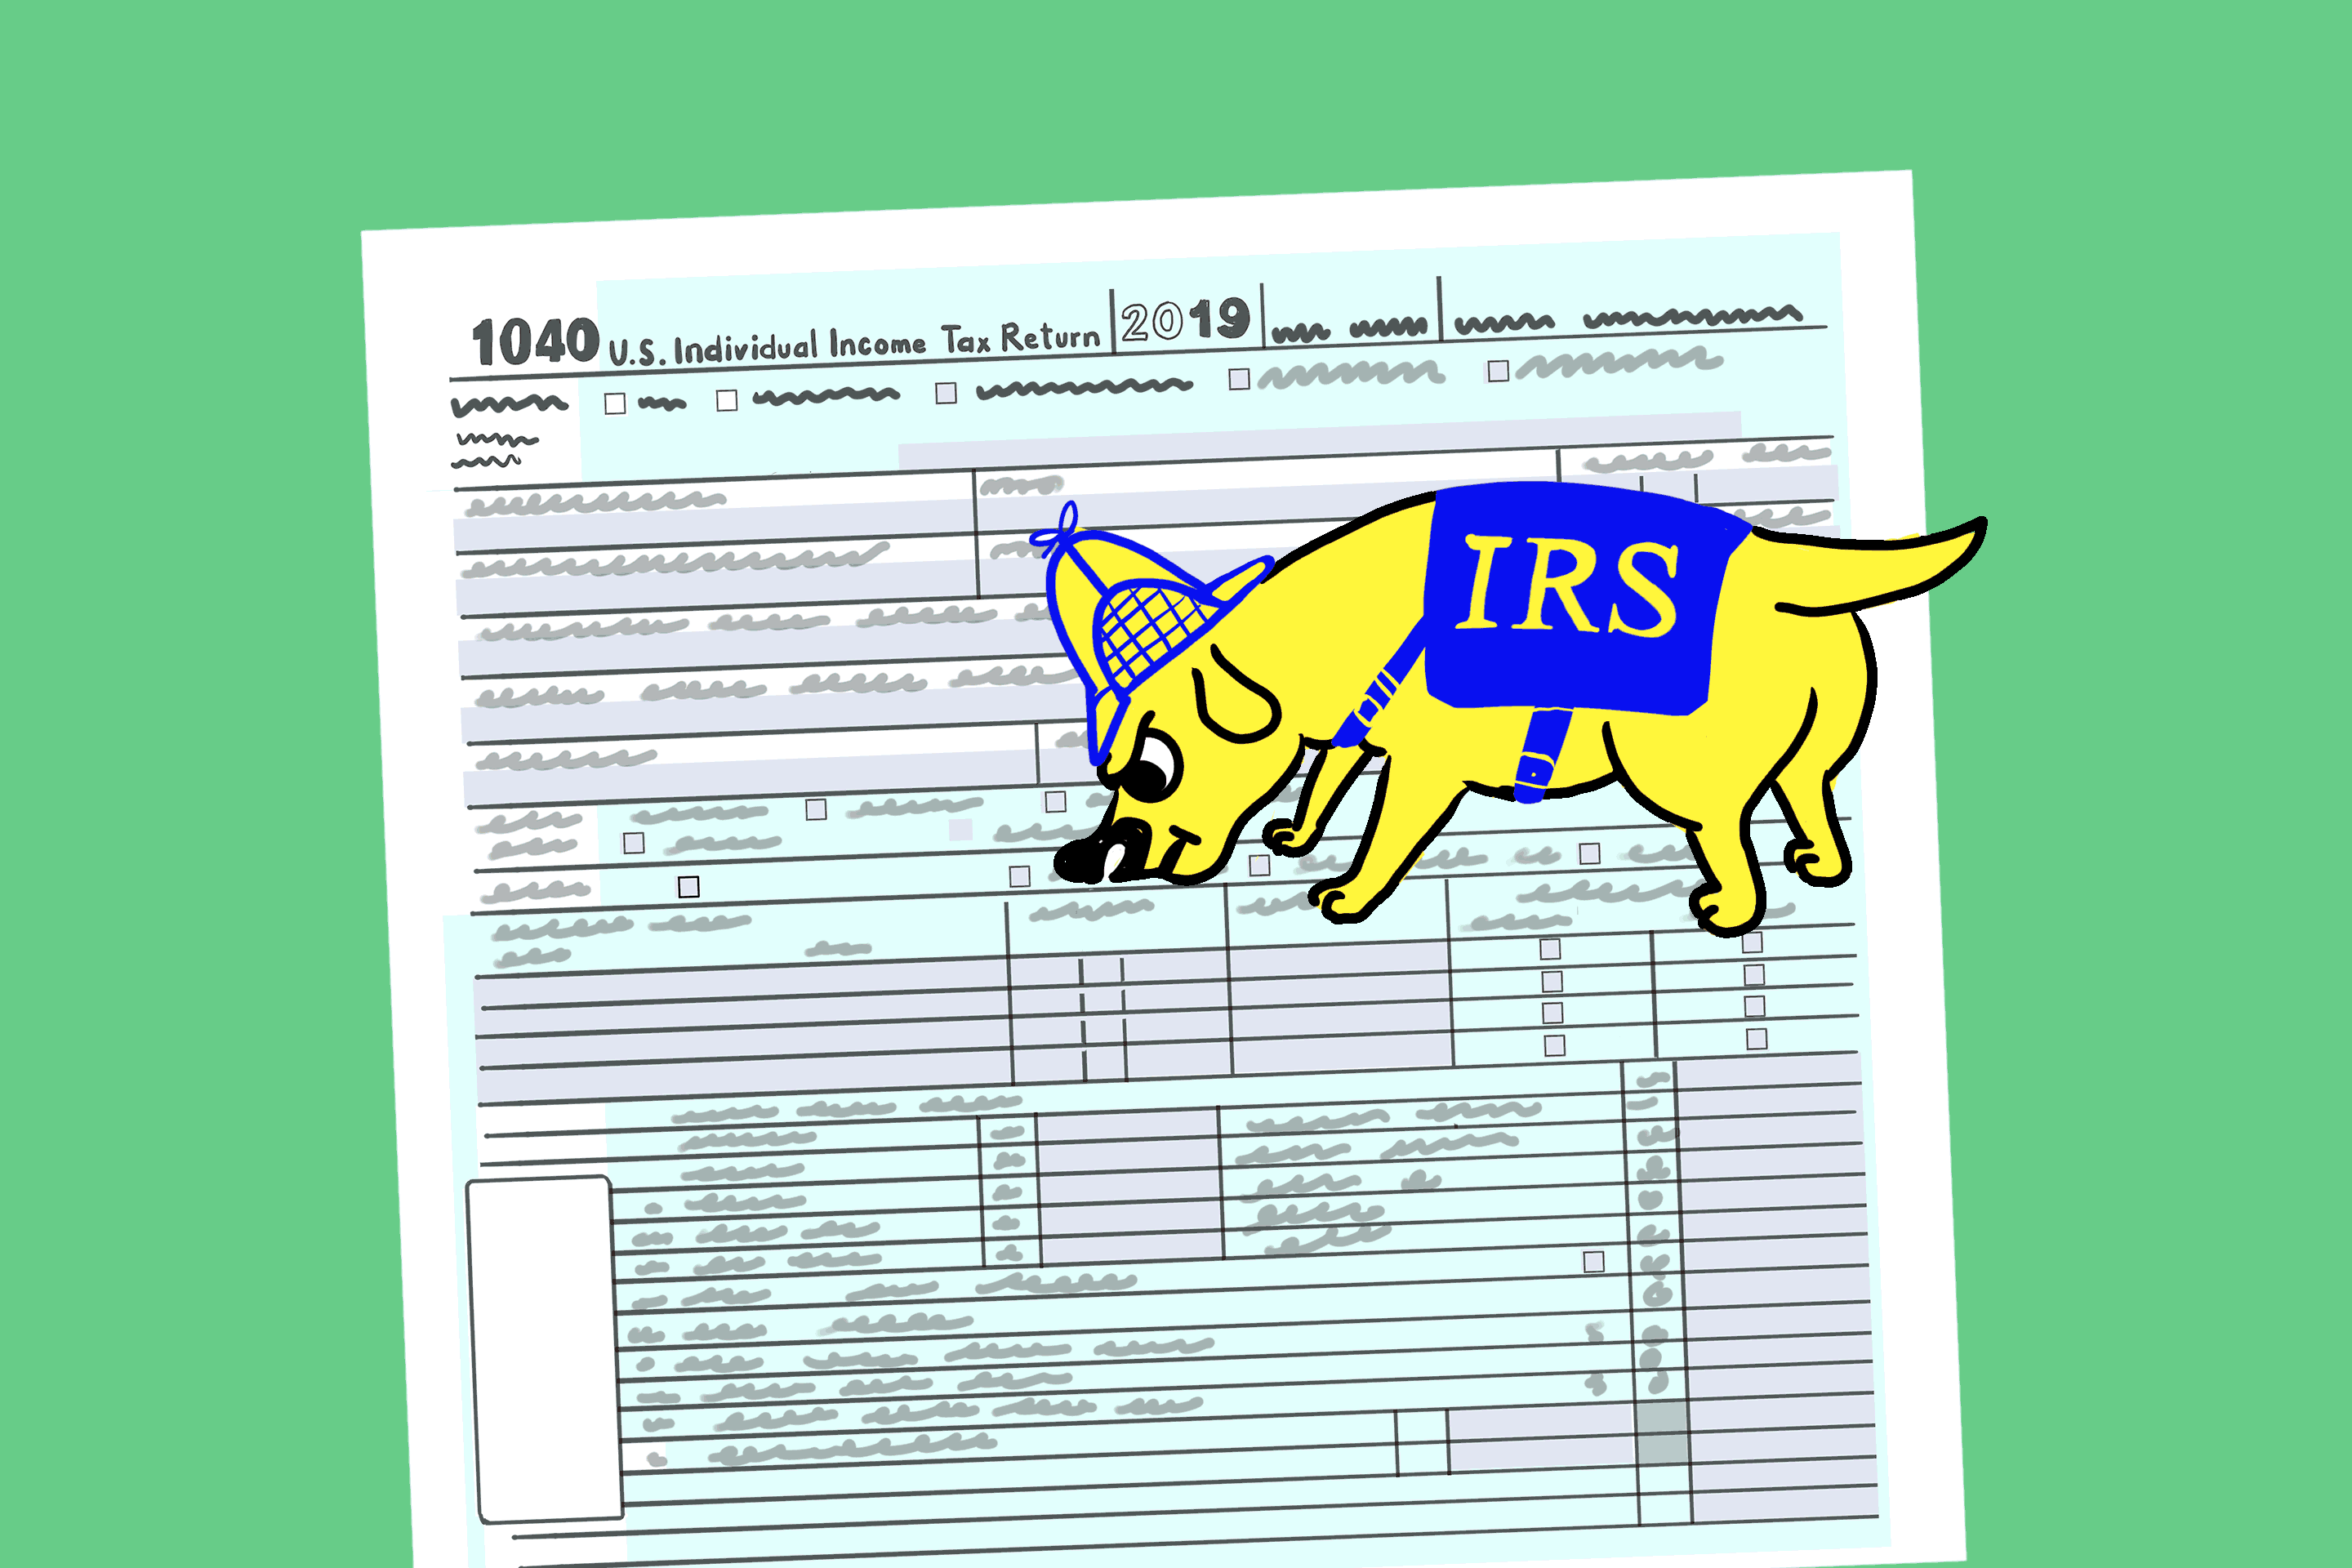 What Are the Real Chances Your Taxes Will Get Audited by the IRS This Year?